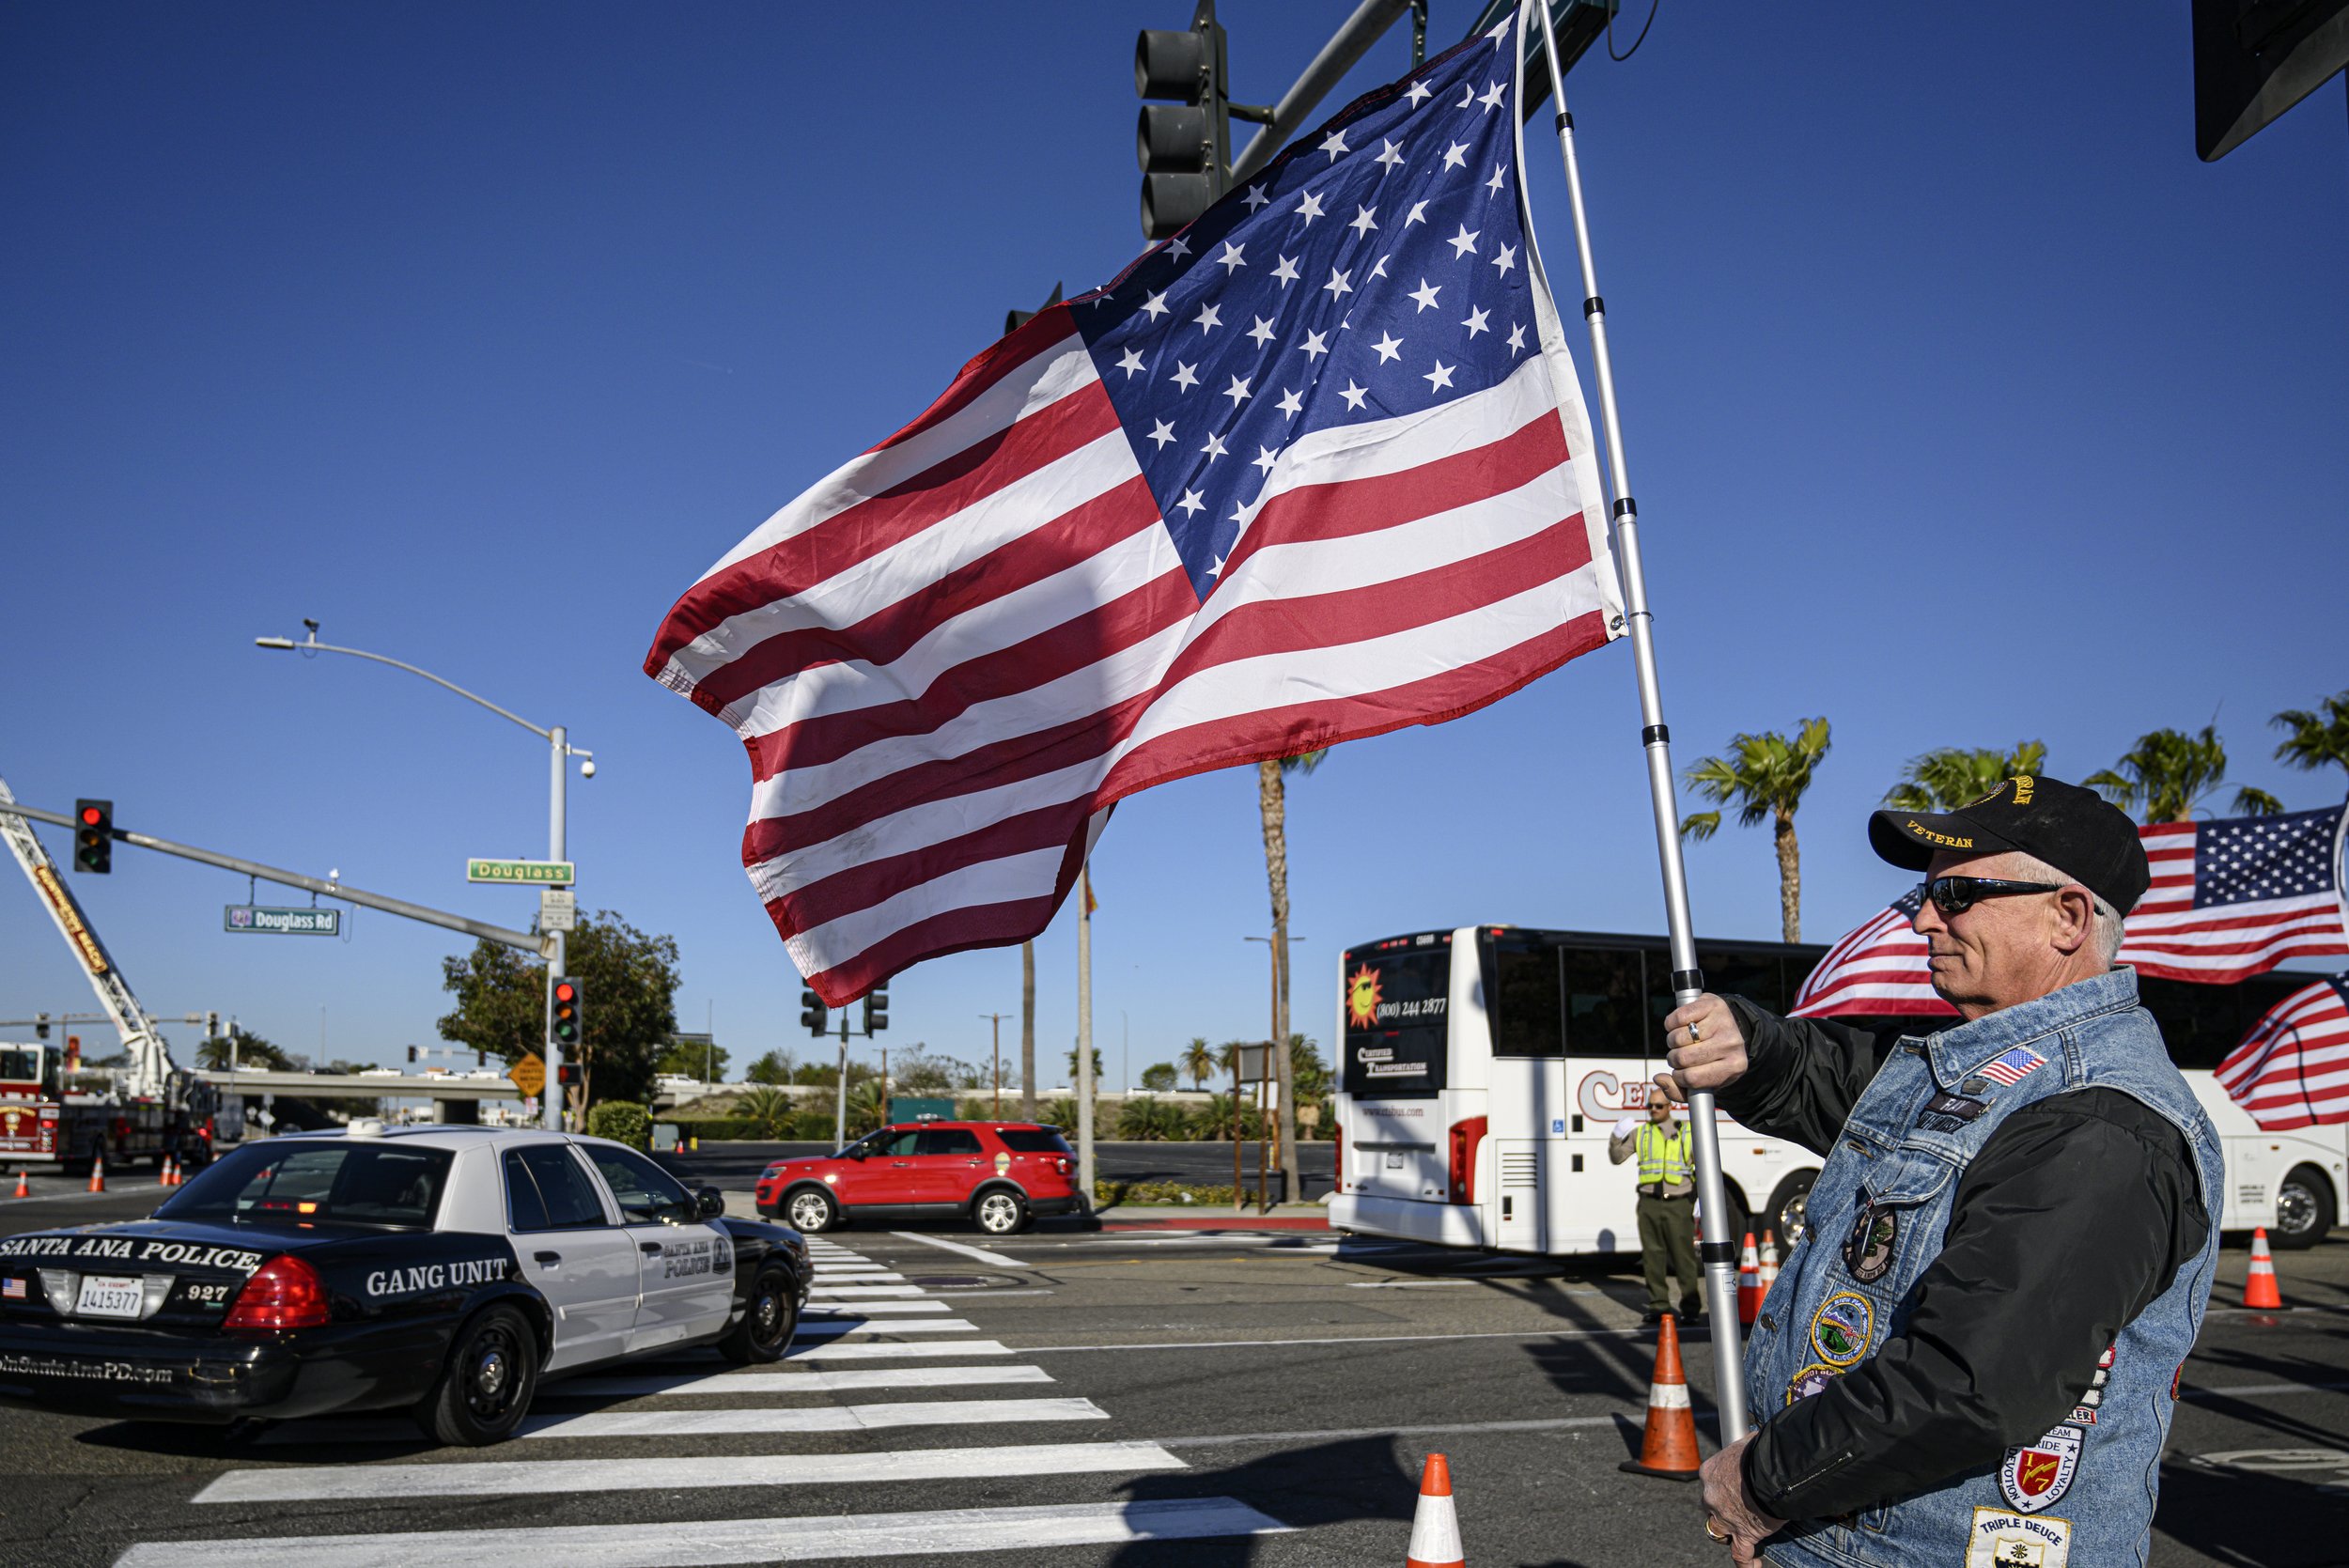  Ray Trosper, a Marine veteran with the Patriot Guard Riders, shows support for Huntington Beach Police Officer Nicholas Vella, who died in a helicopter crash Feb. 19 off the waters in Newport Beach. Funeral services were at the Honda Center in Anahe